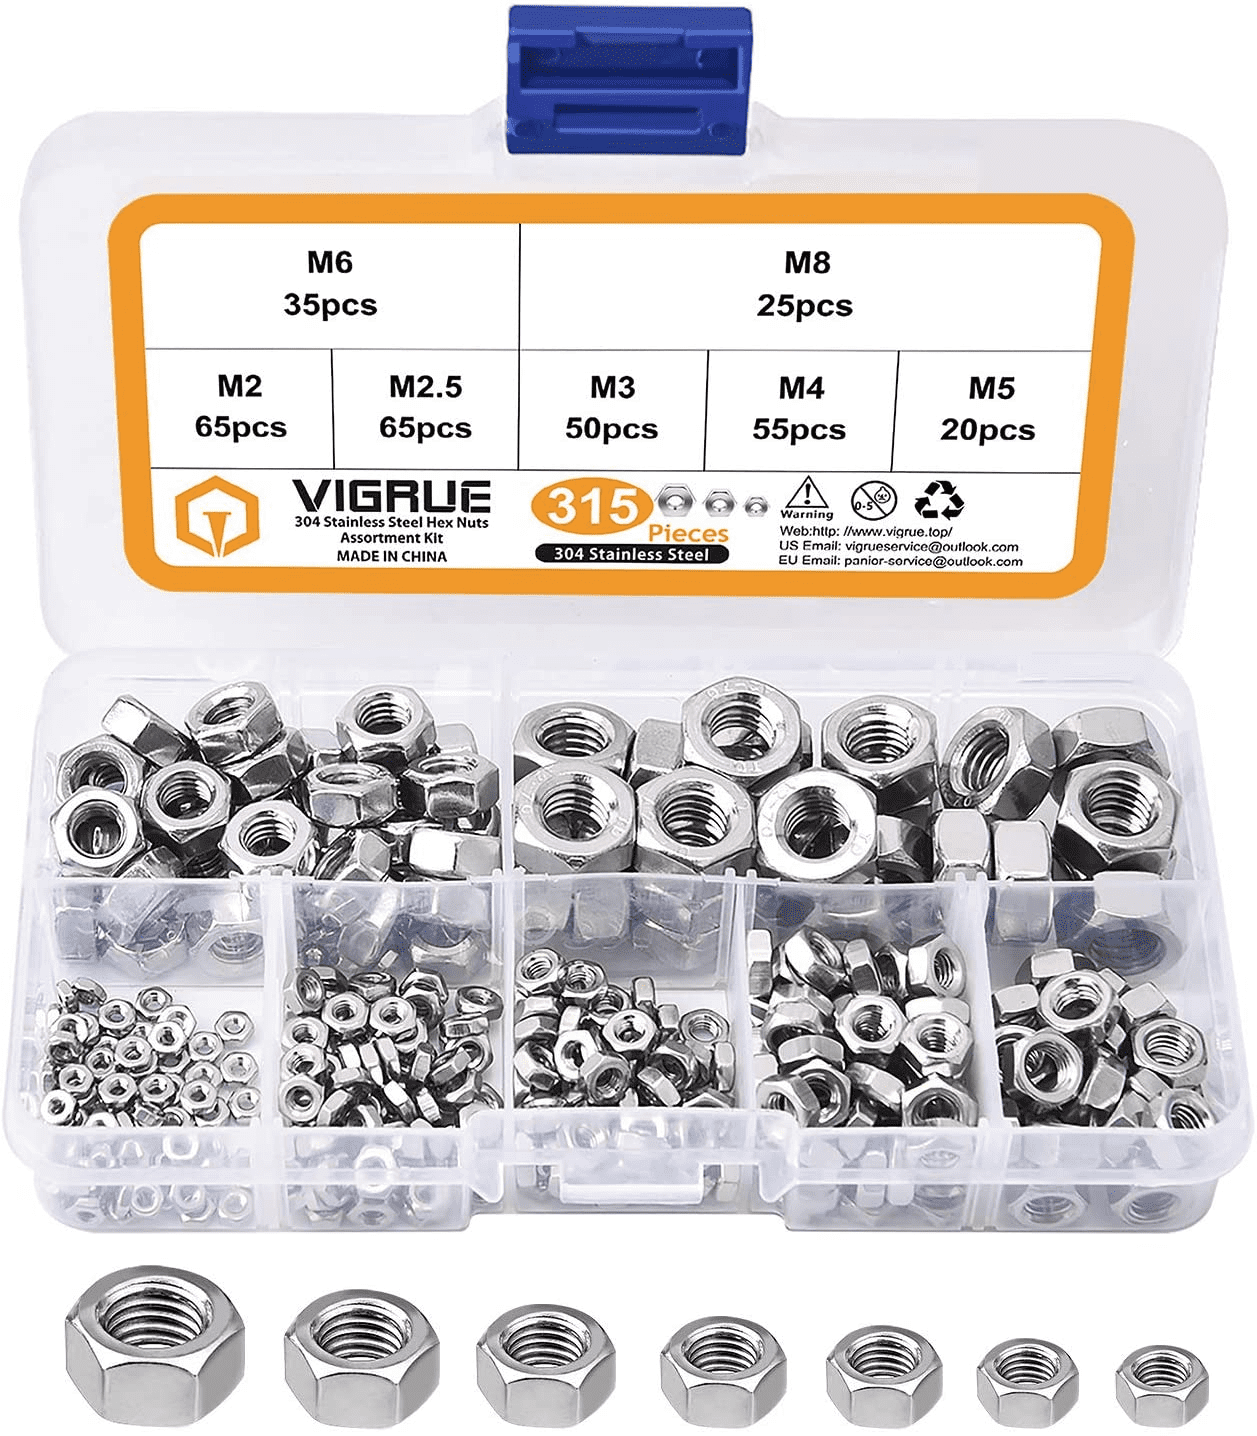 M6 & M8 Lock nuts Washer M5 Metric Stainless Nut & Washer assortment M4 Flat 